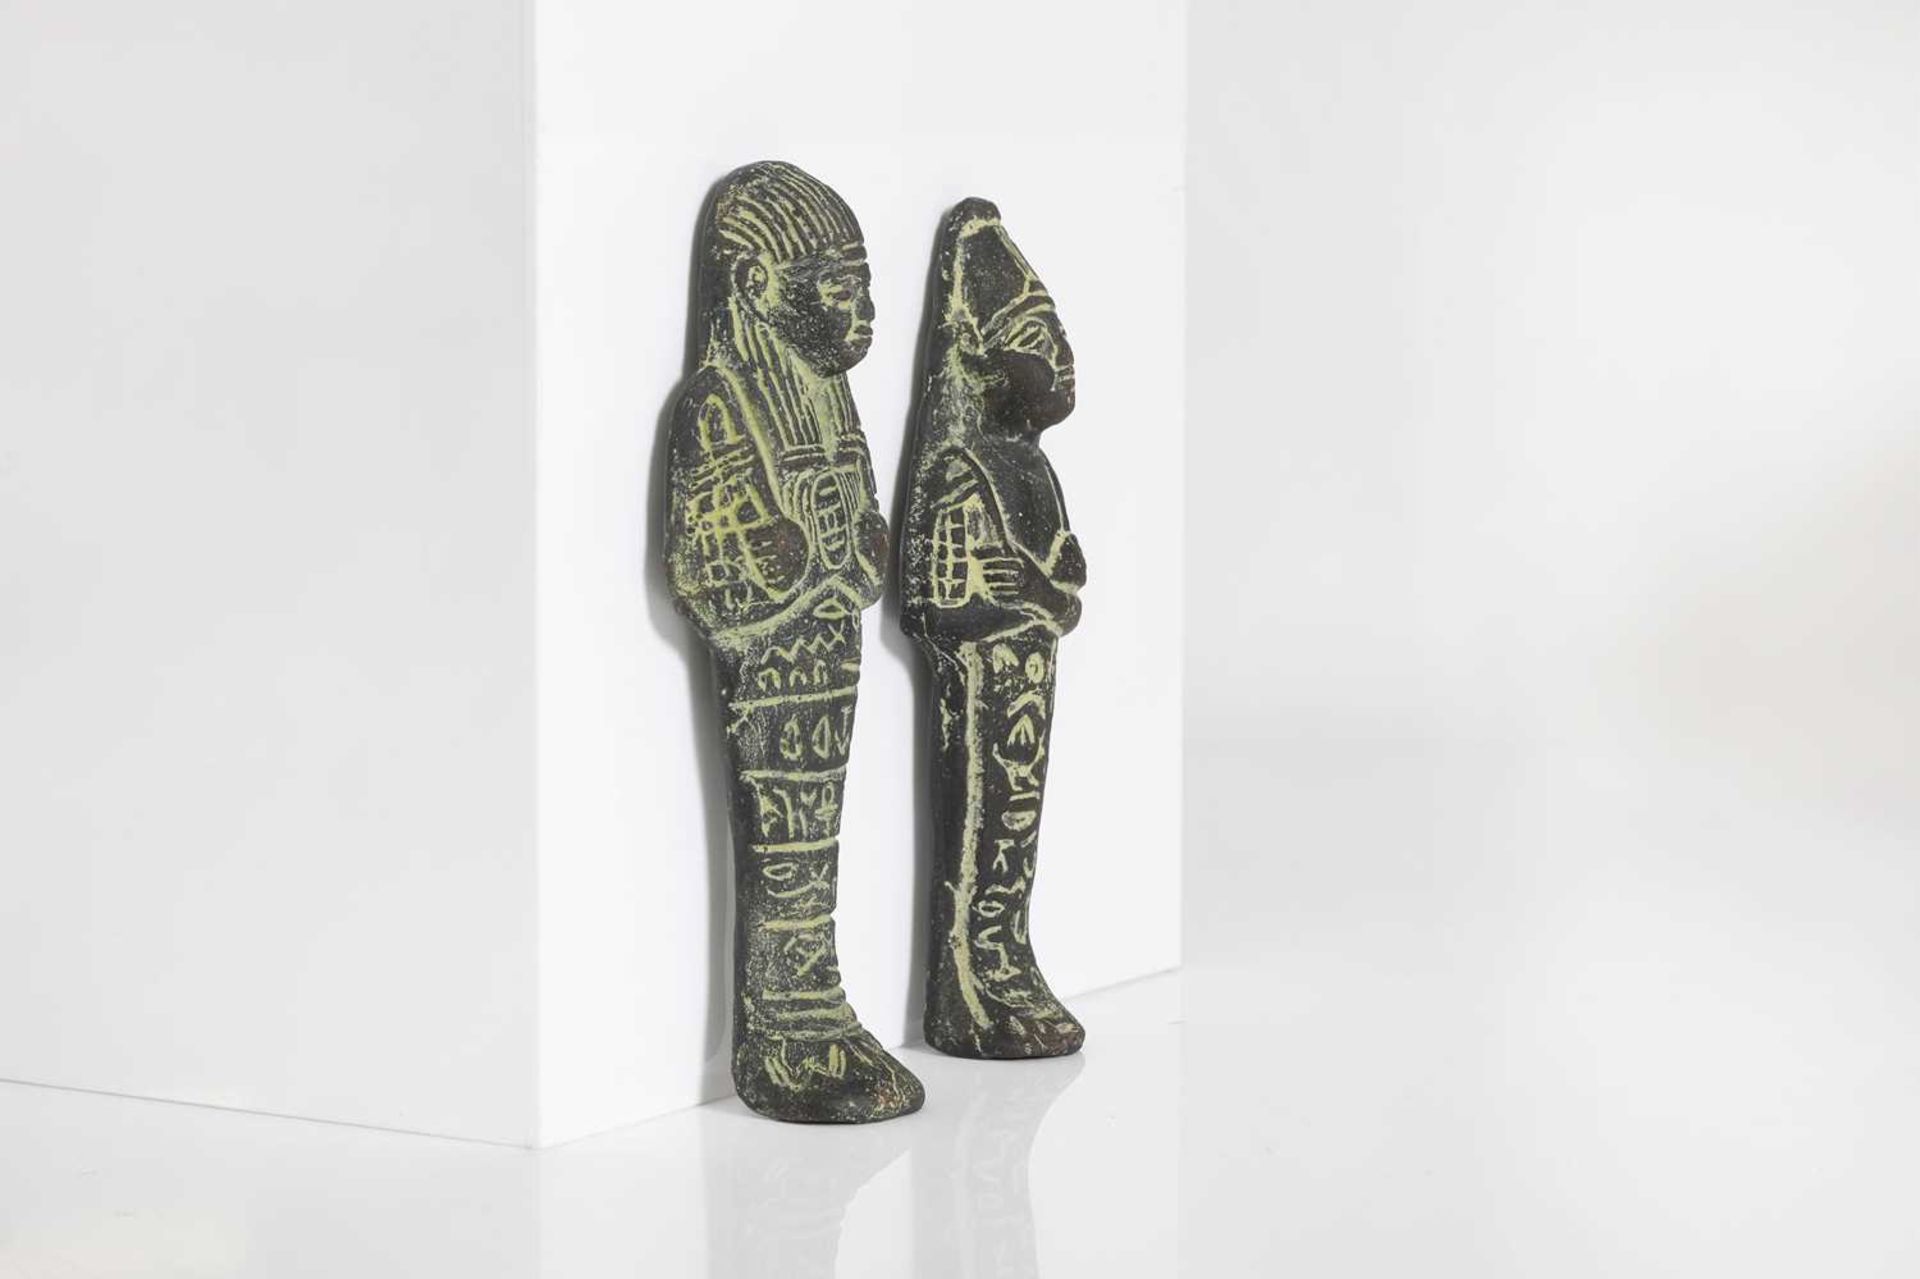 A pair of Egyptian-style clay ushabti figures, - Image 3 of 10